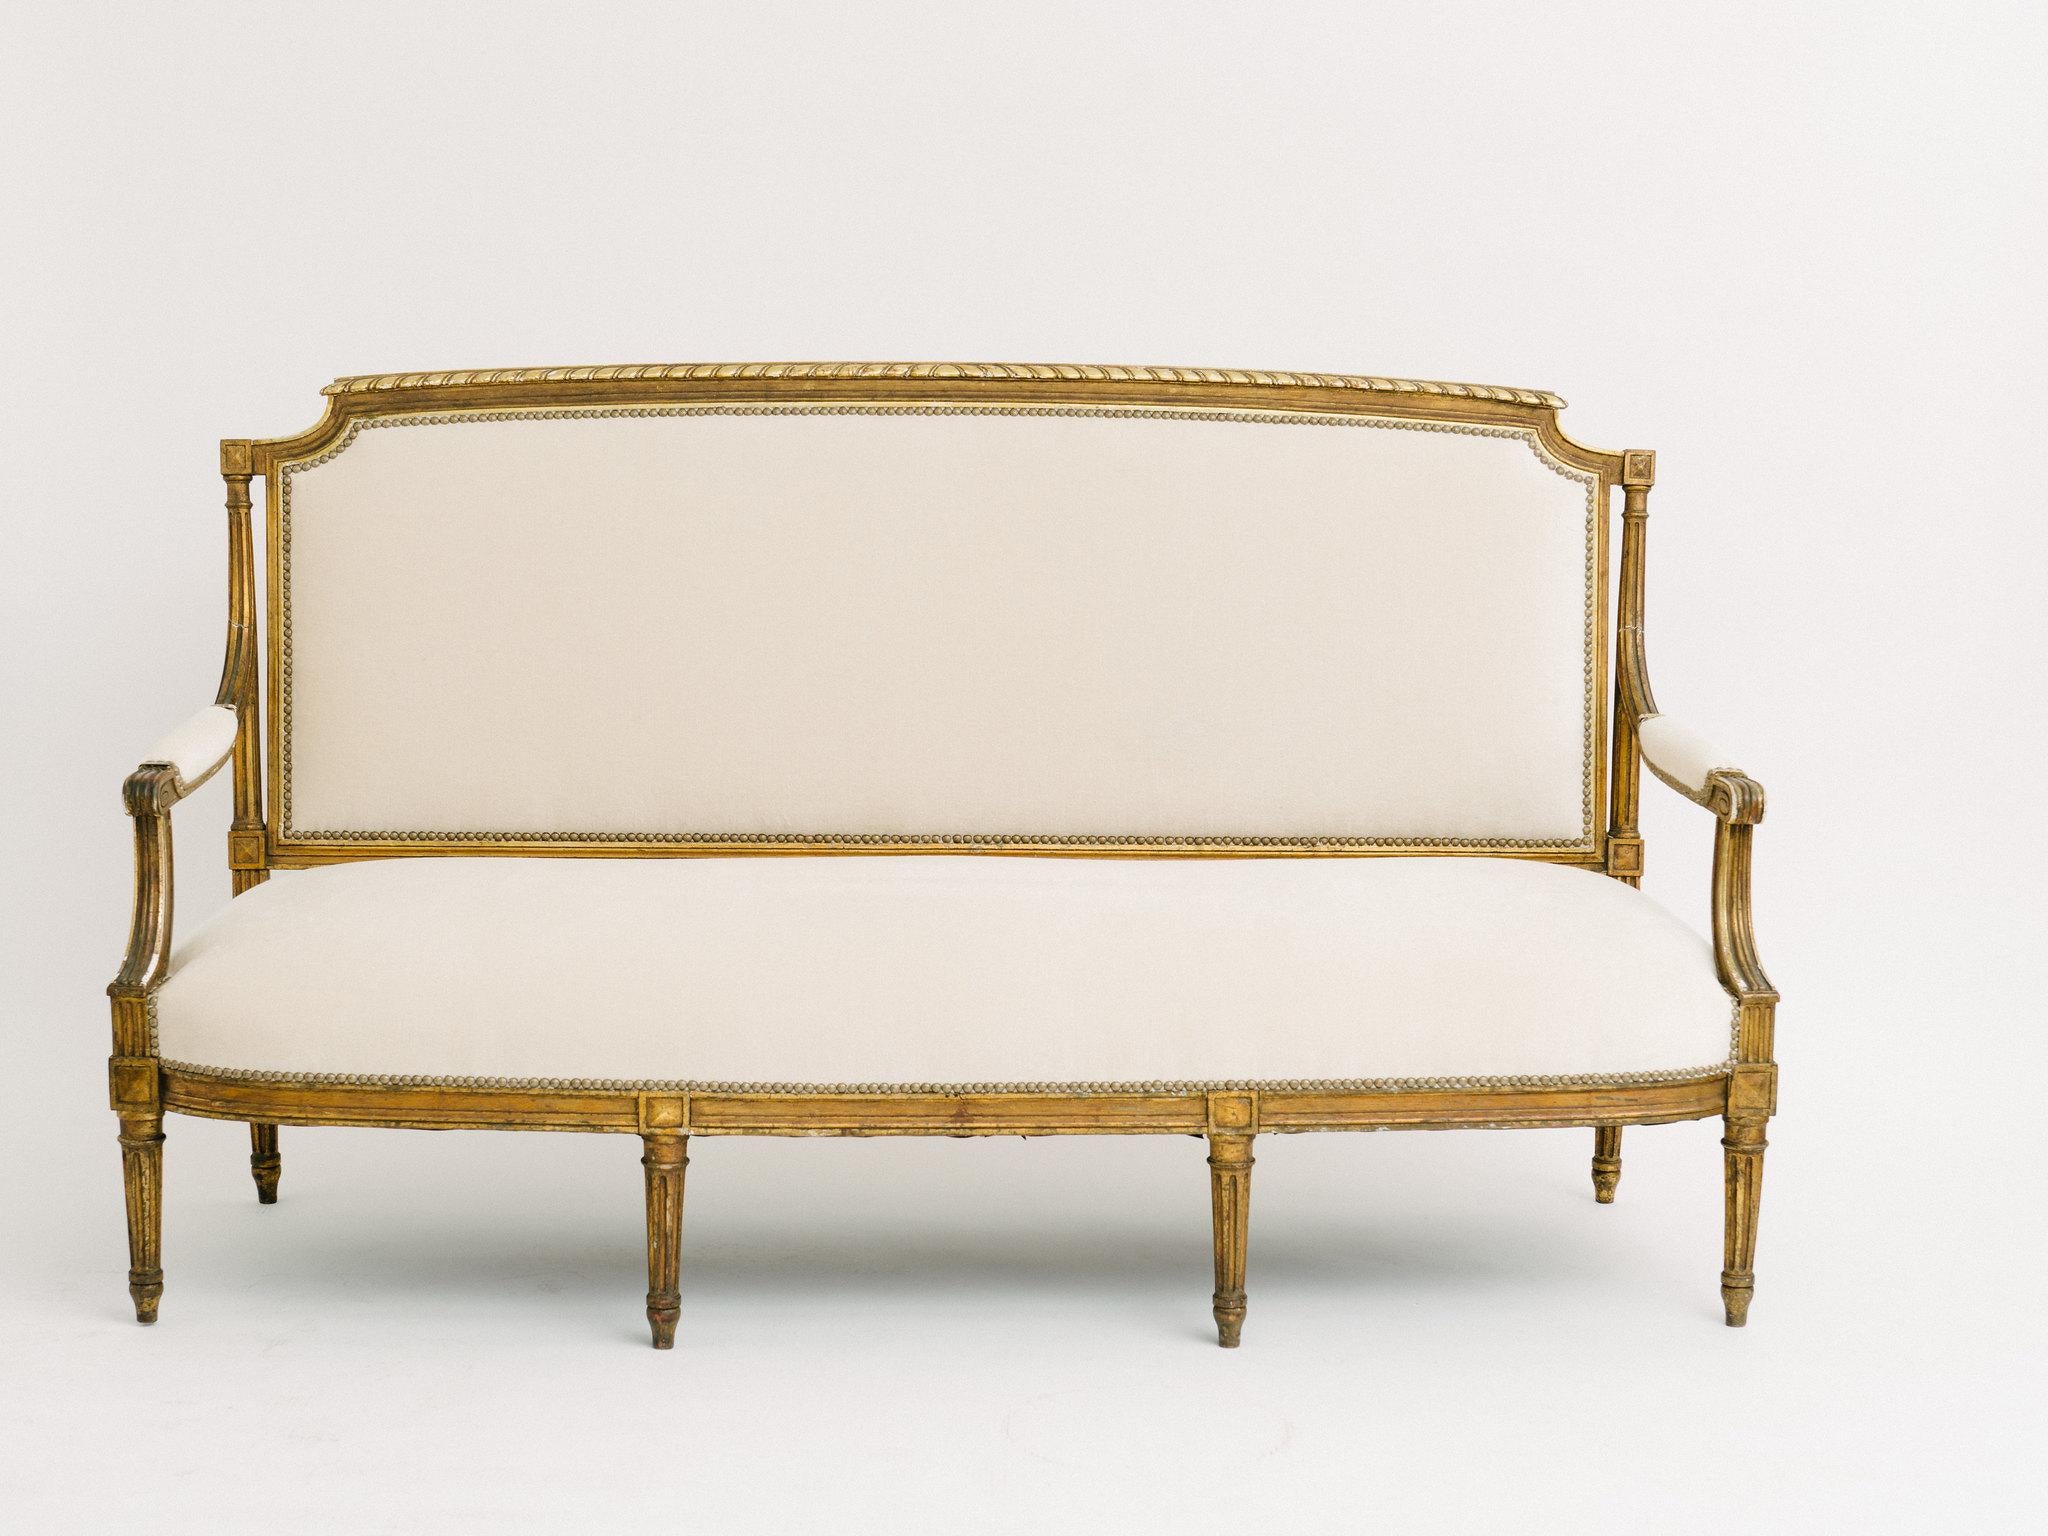 A lovely 19th century Louis XVI style settee newly upholstered in a creamy ecru mohair silk velvet with nailhead detail.